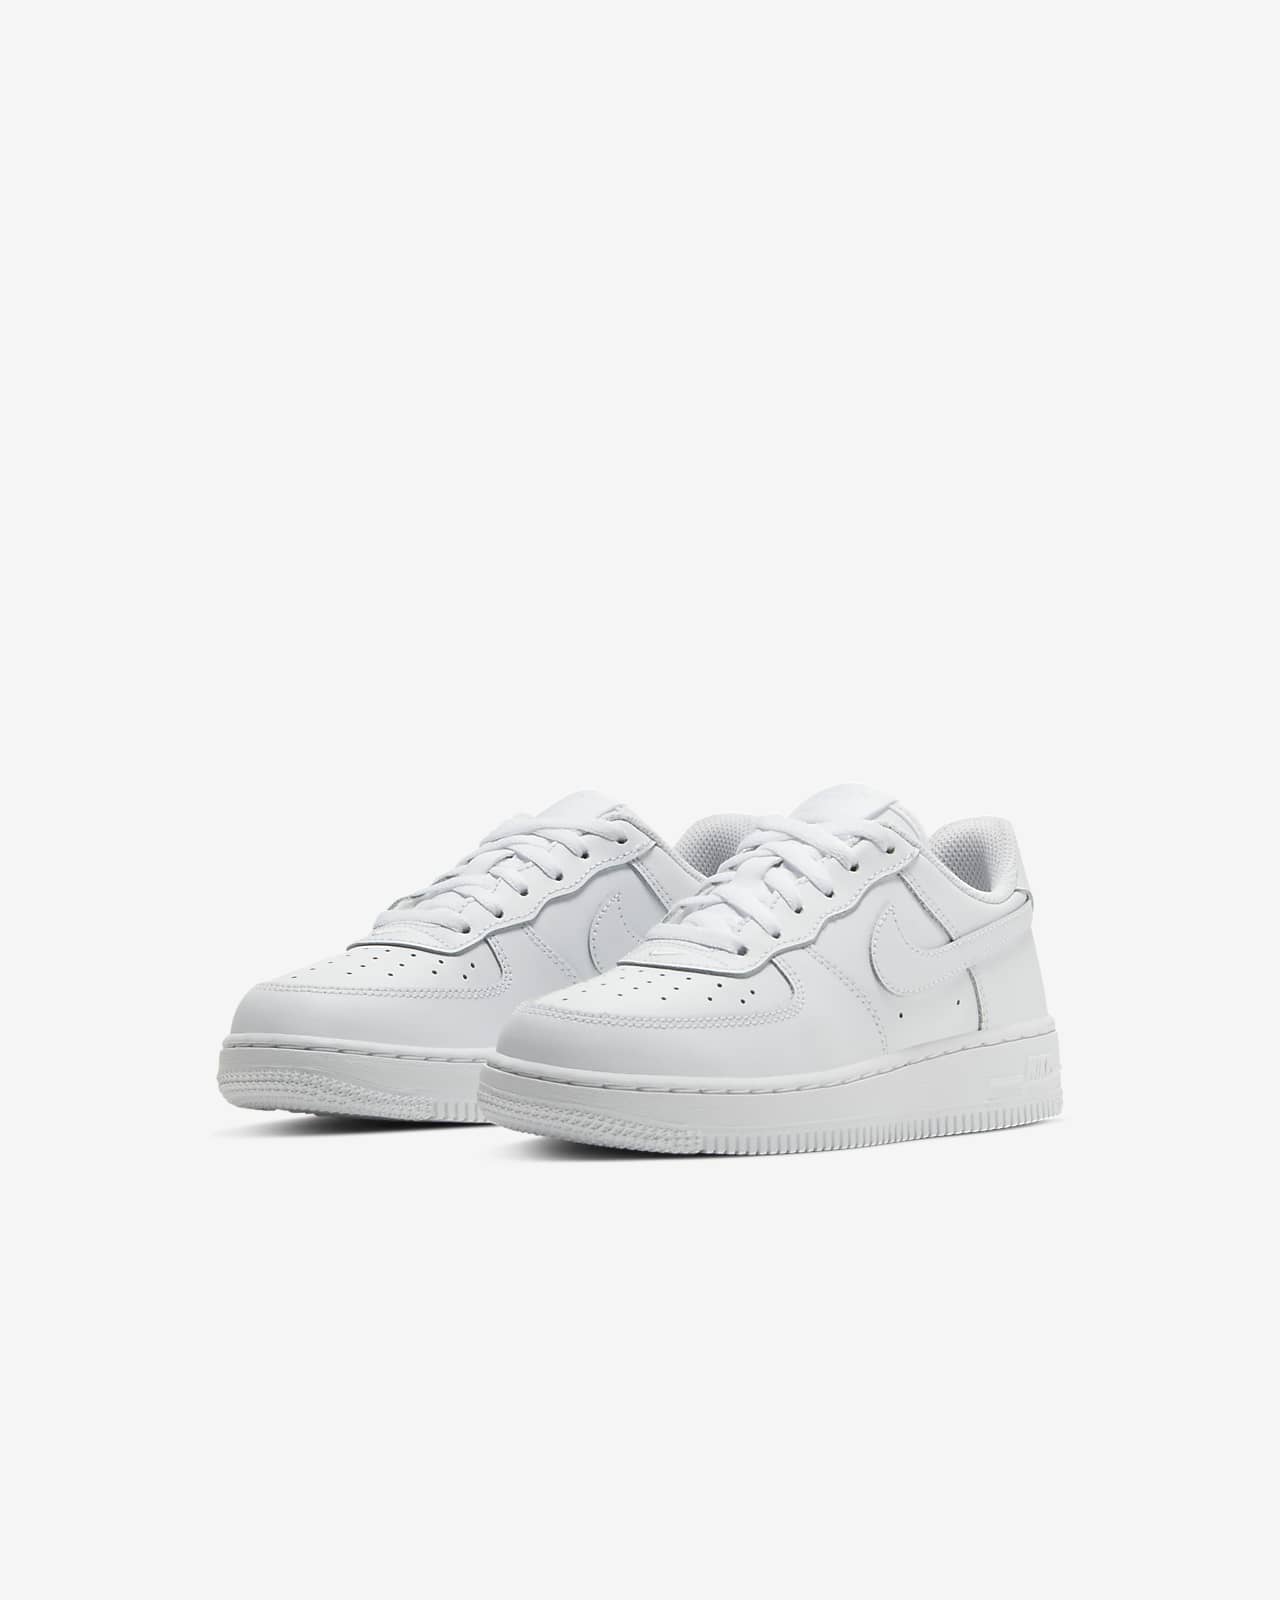 nike younger kids sizes